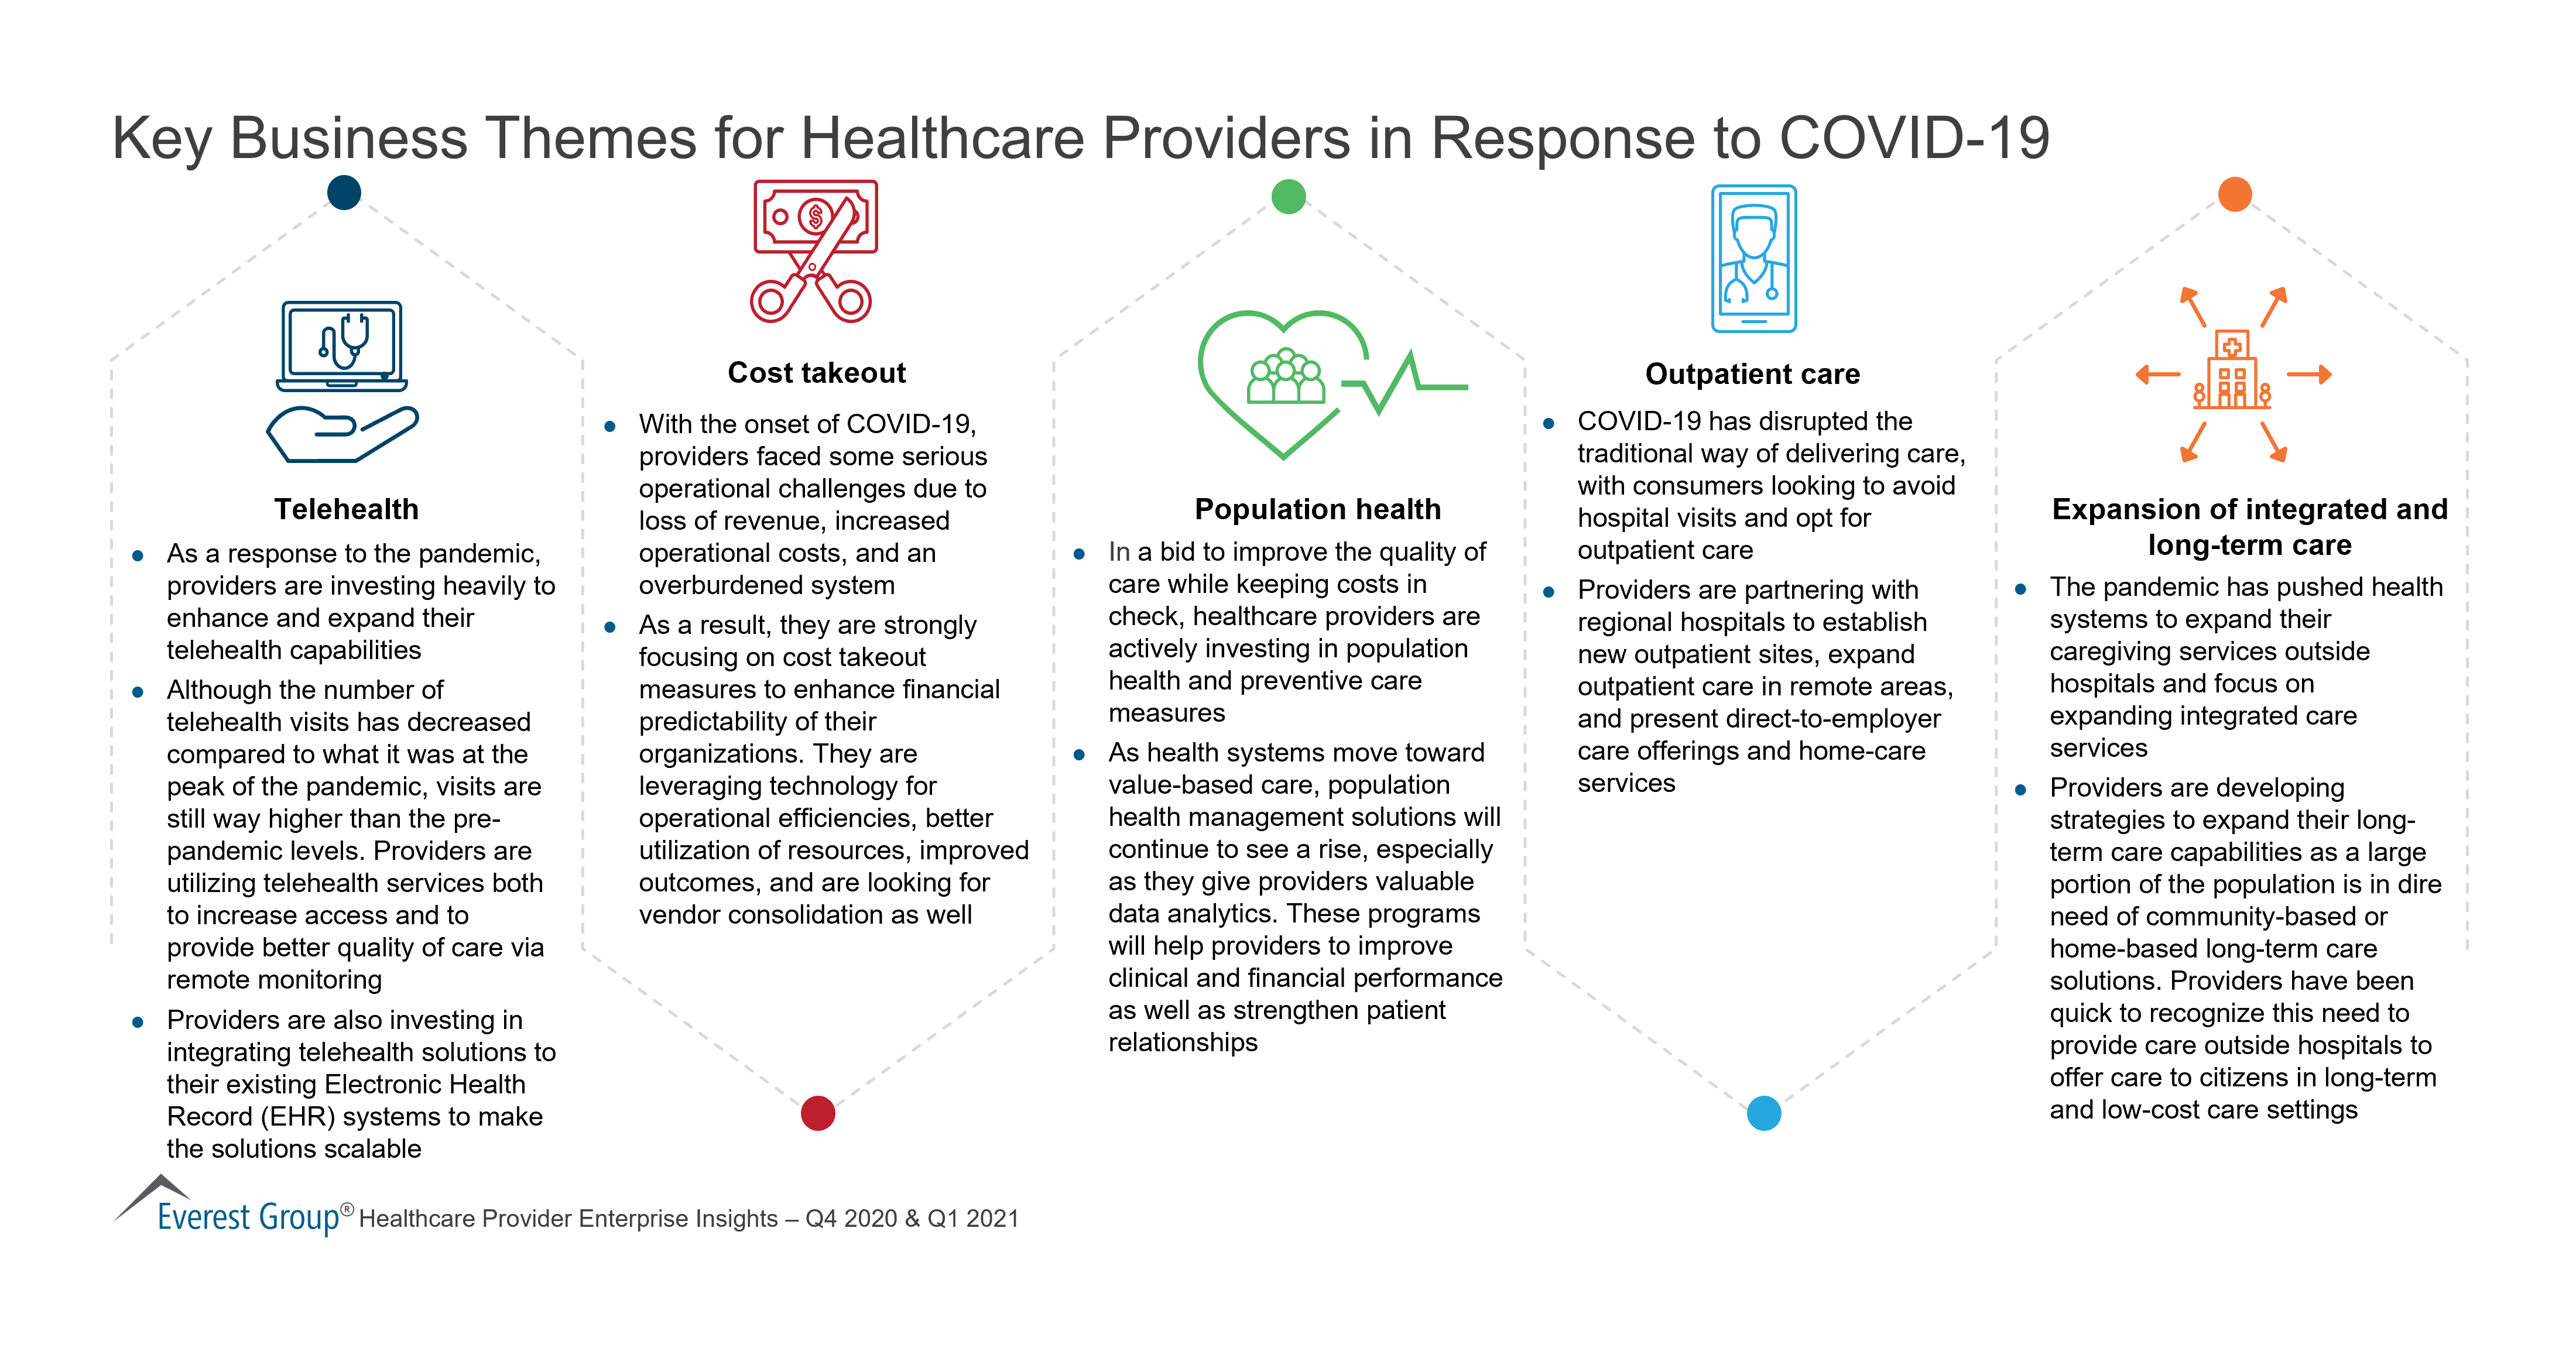 Key Business Themes For Healthcare Providers in Response to Covid-19